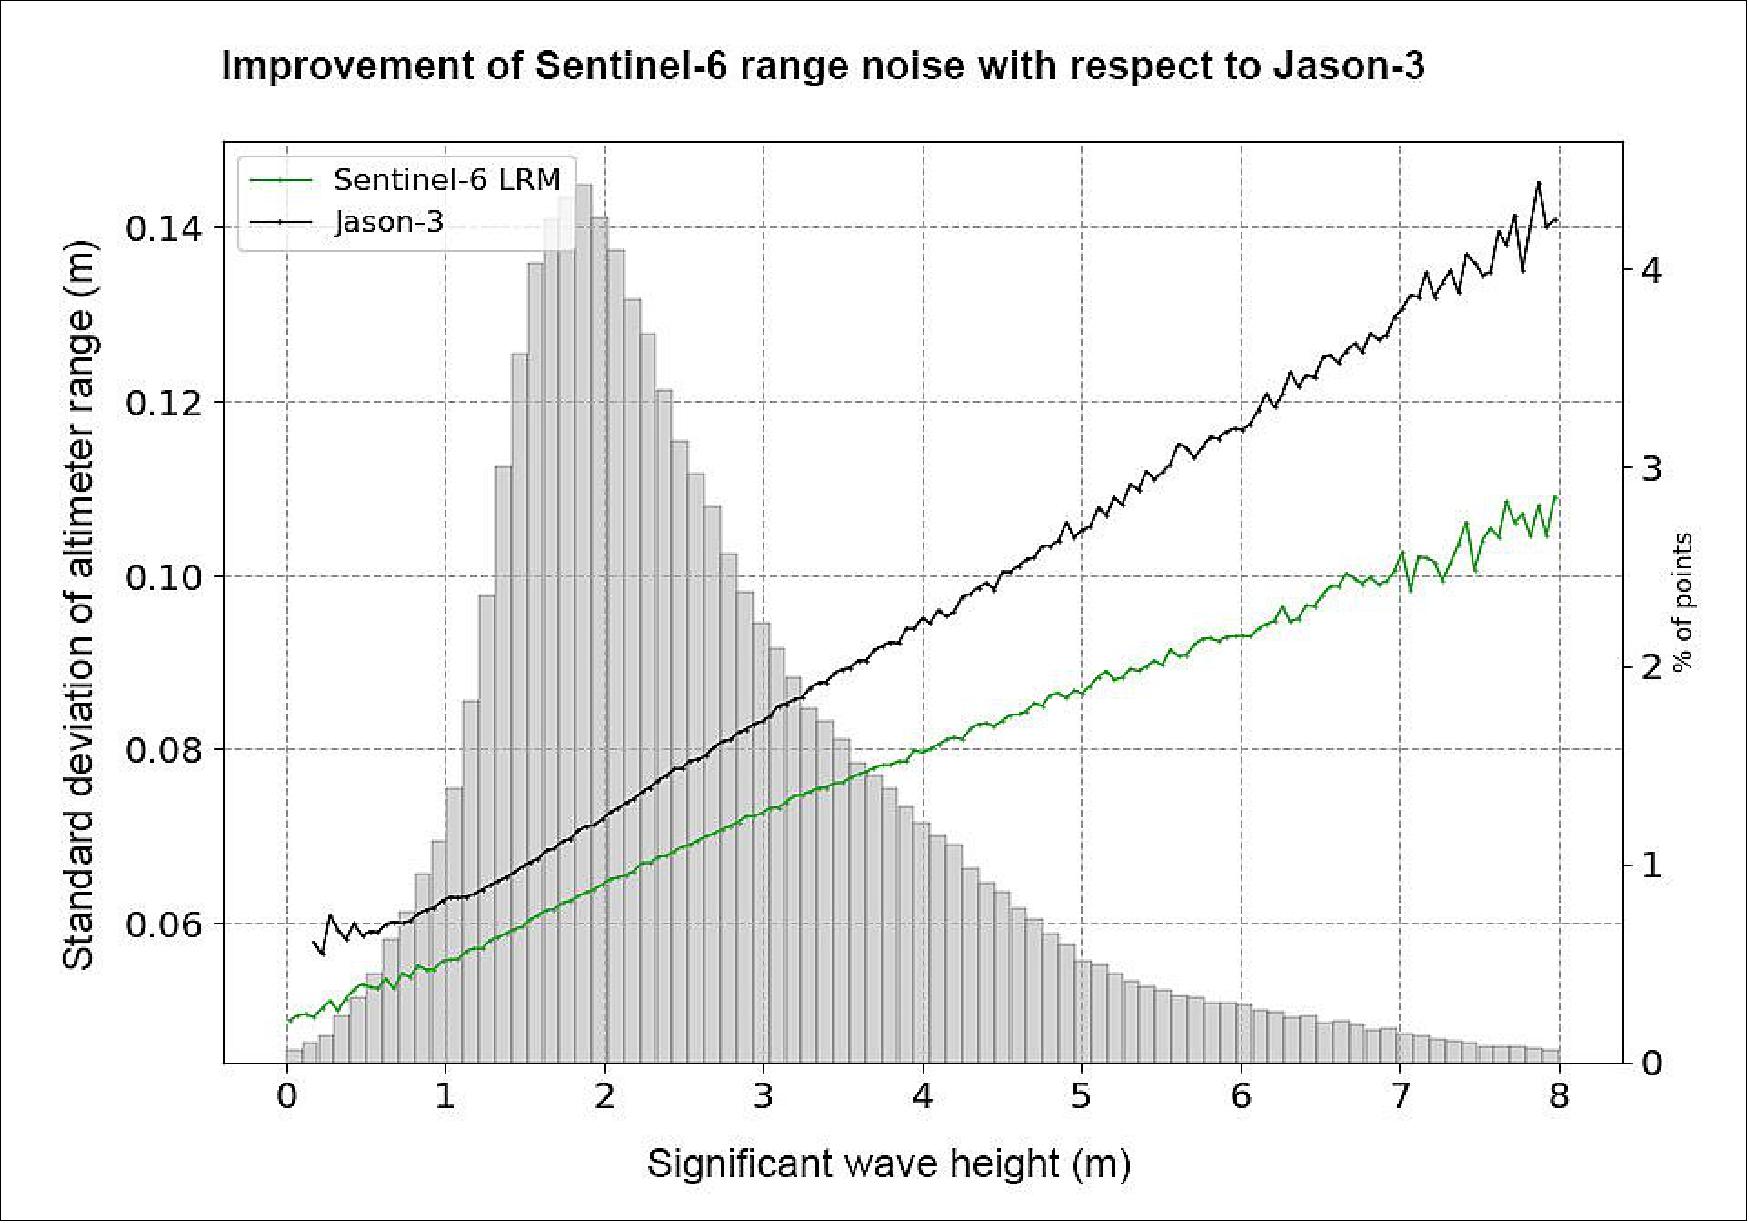 Figure 22: Improvement of Sentinel-6 range noise with respect to Jason-3 (image credit: CLS)